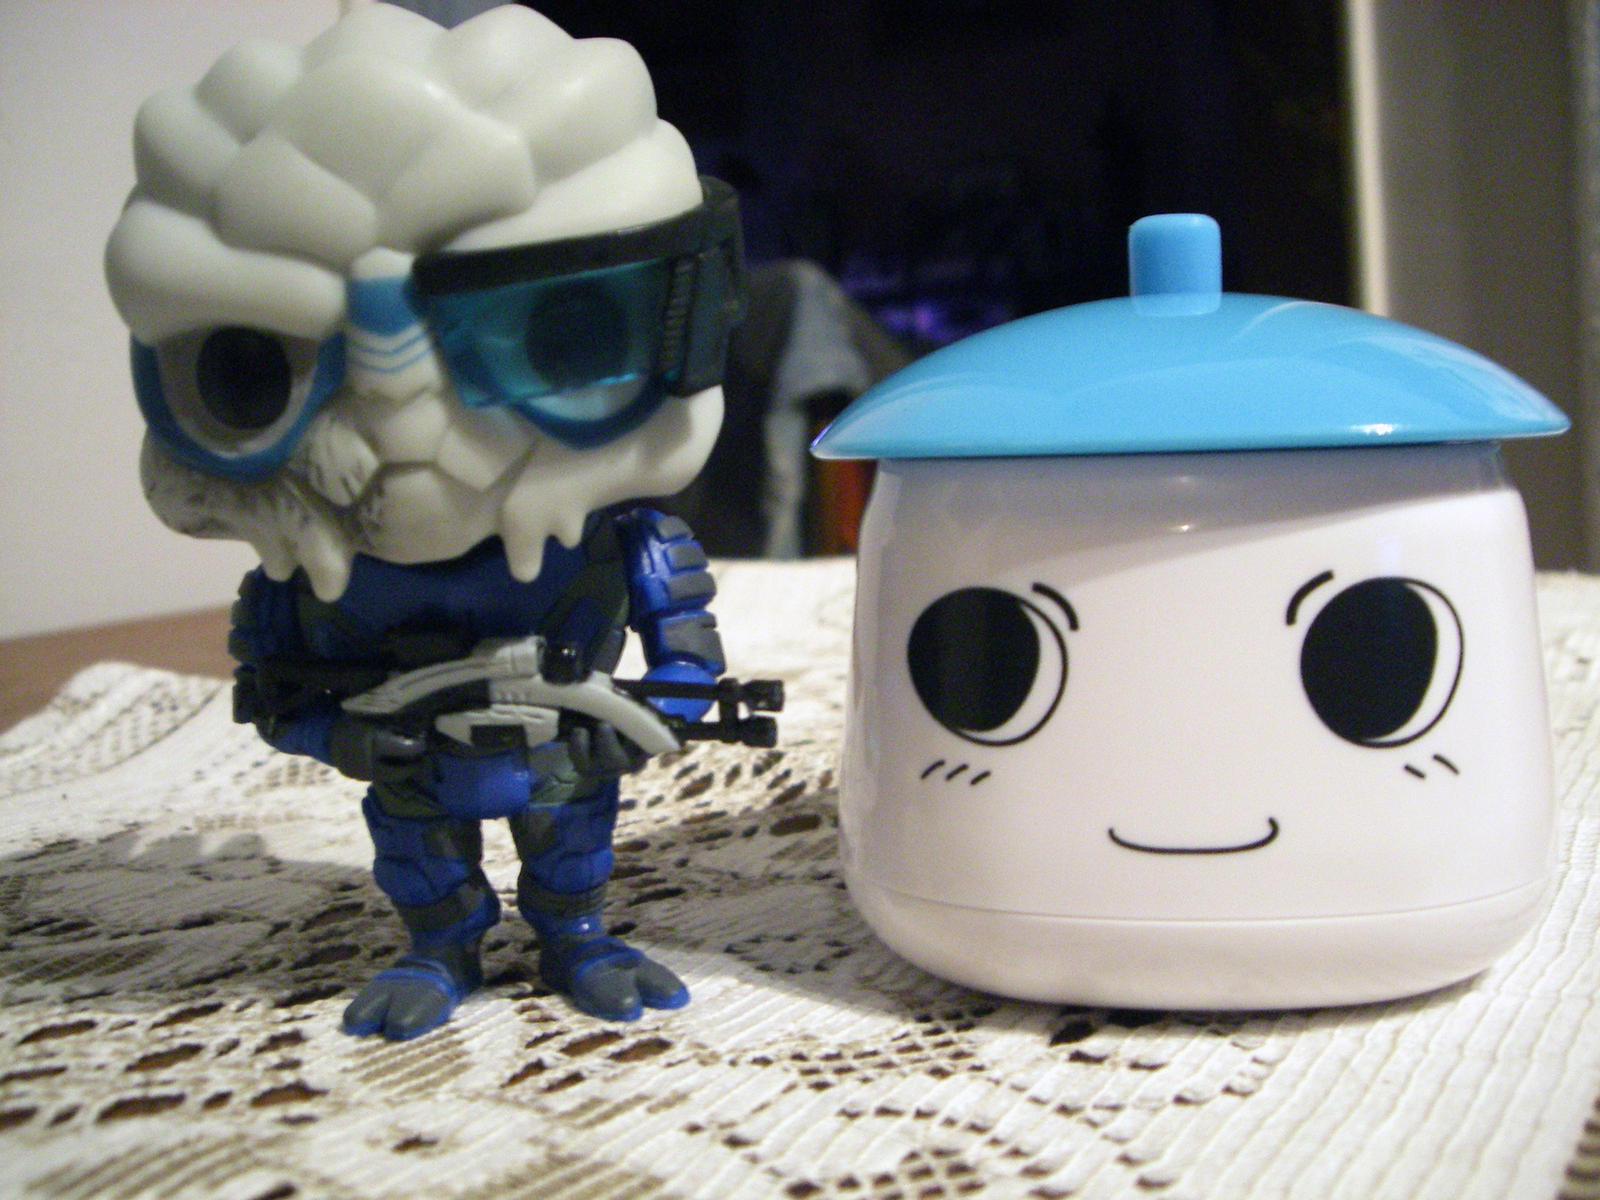 garrus_and_his_new_cute_friend_by_gentle